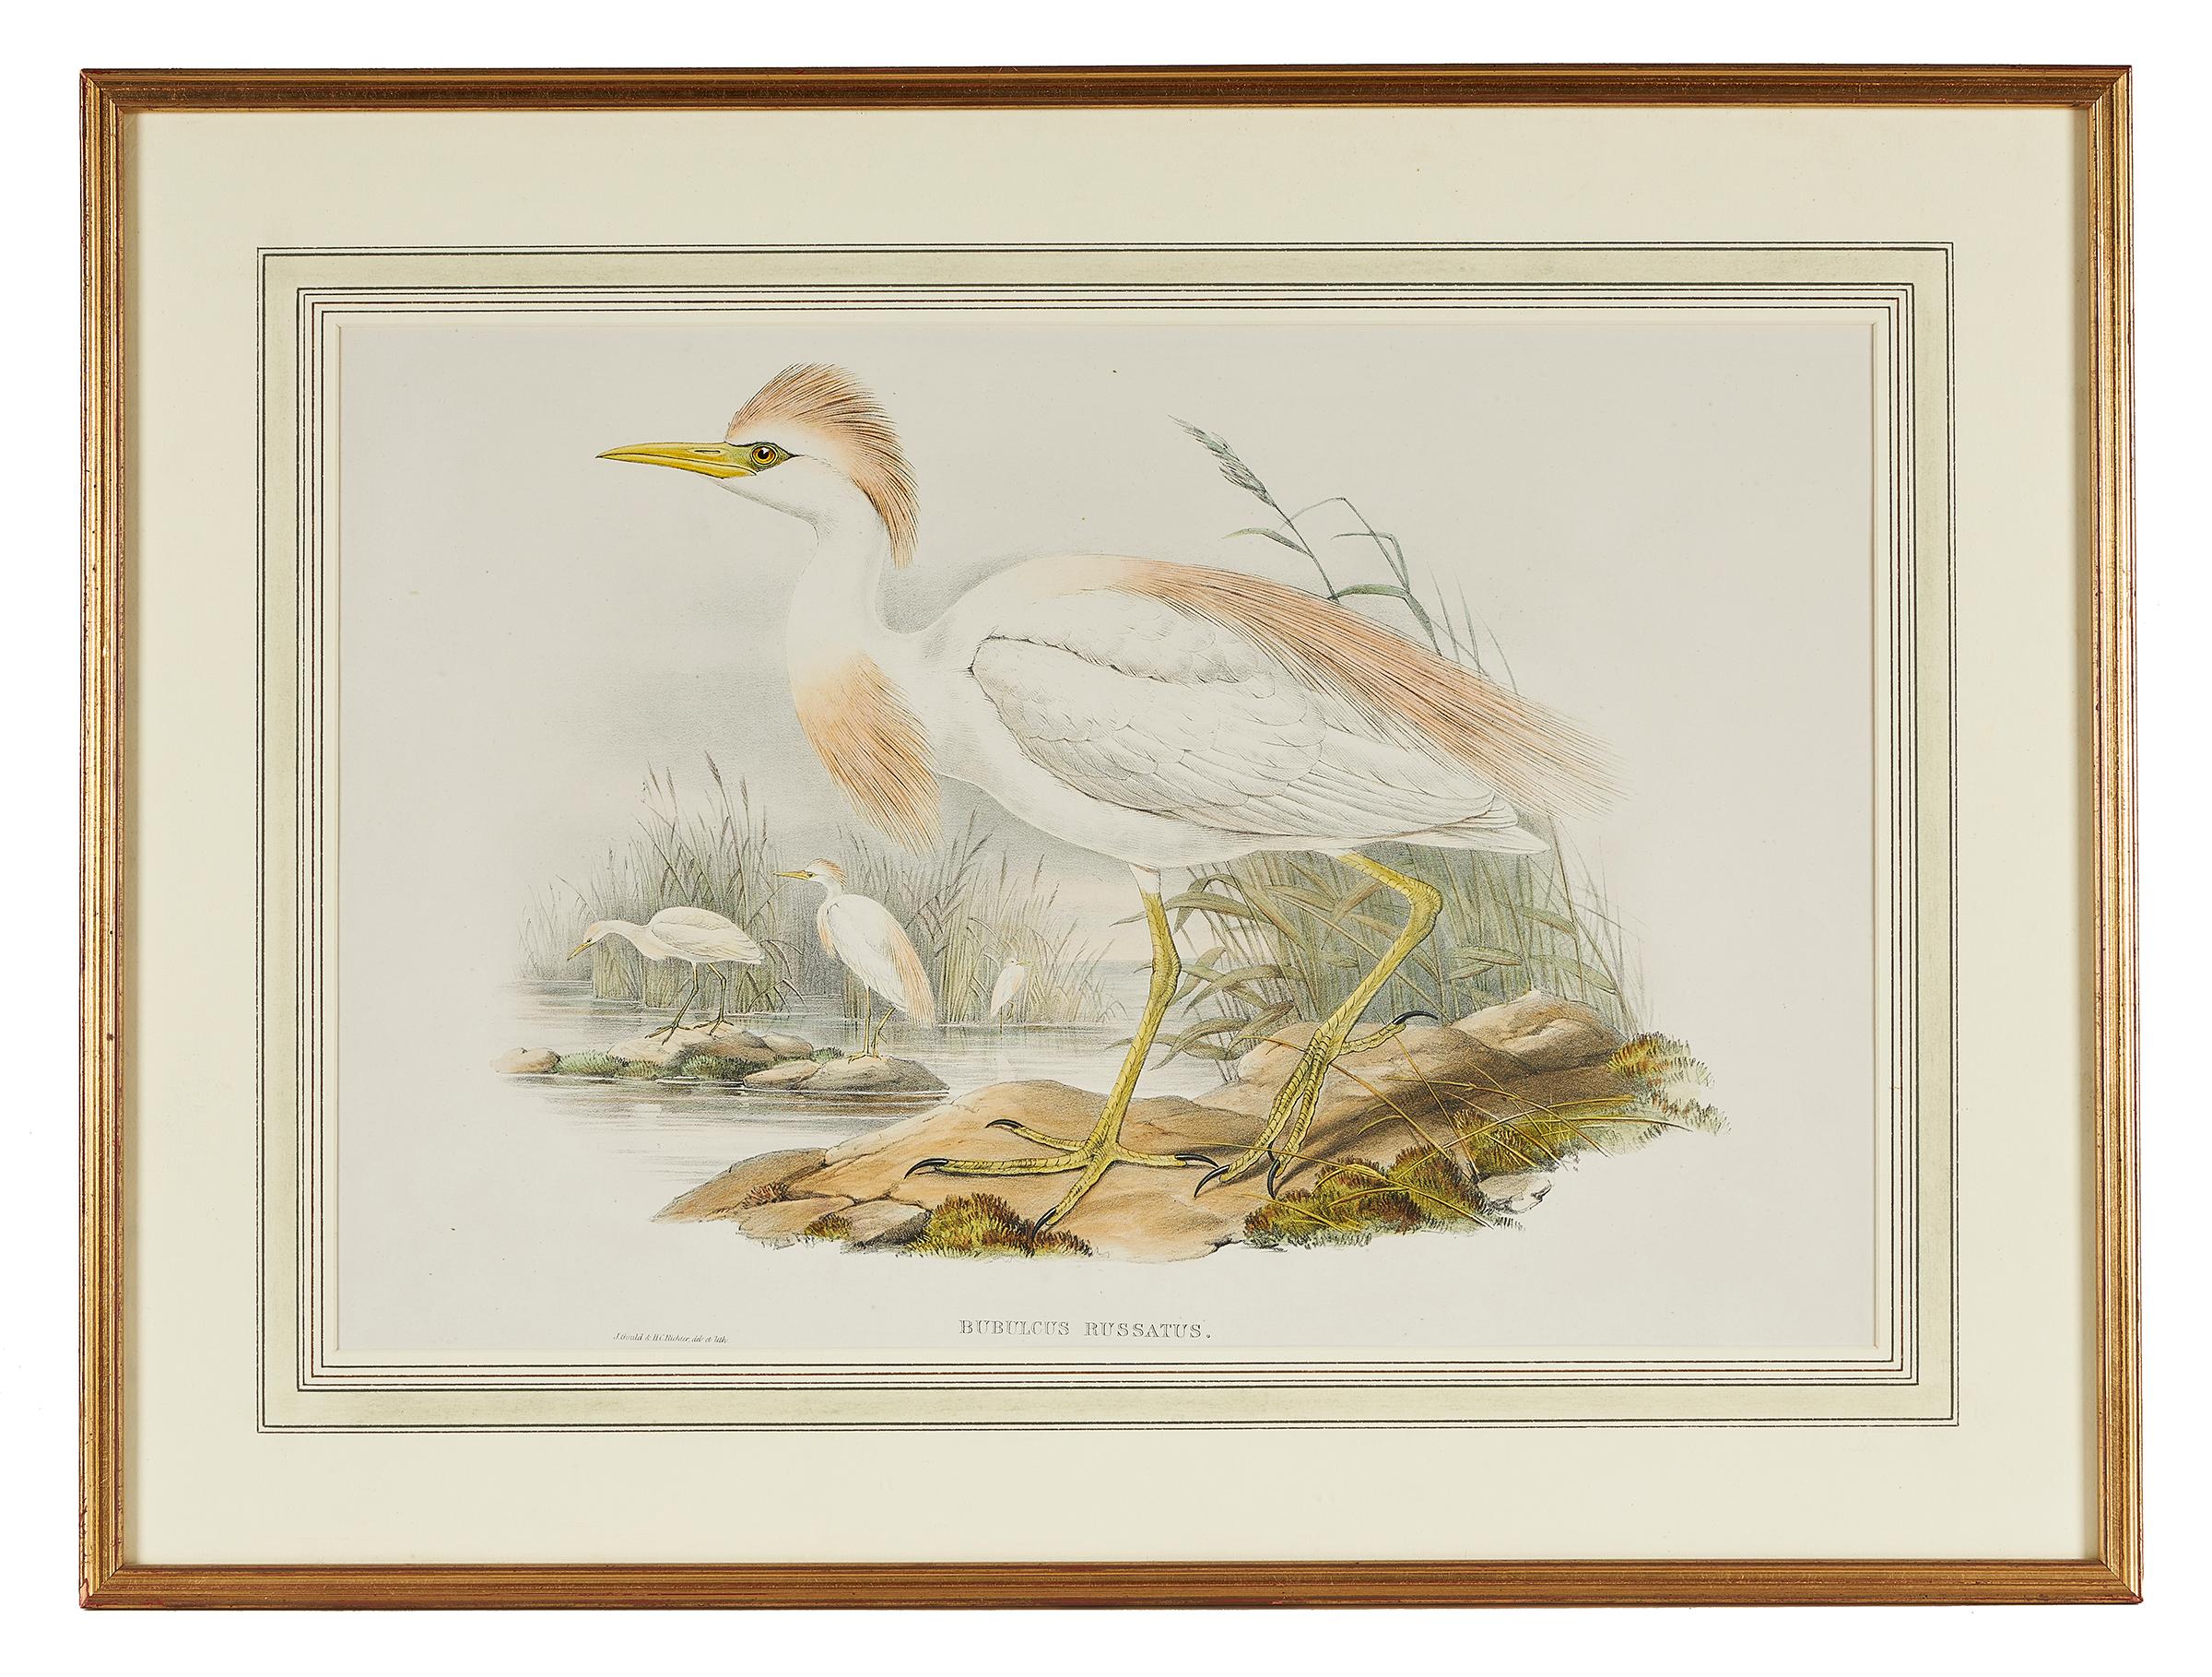 John Gould (British, 1804-1881), 'Bubulcus Russatus', Buff Backed Heron, from 'The Birds of Great Britain', hand colored lithograph, published 1863-73, framed.